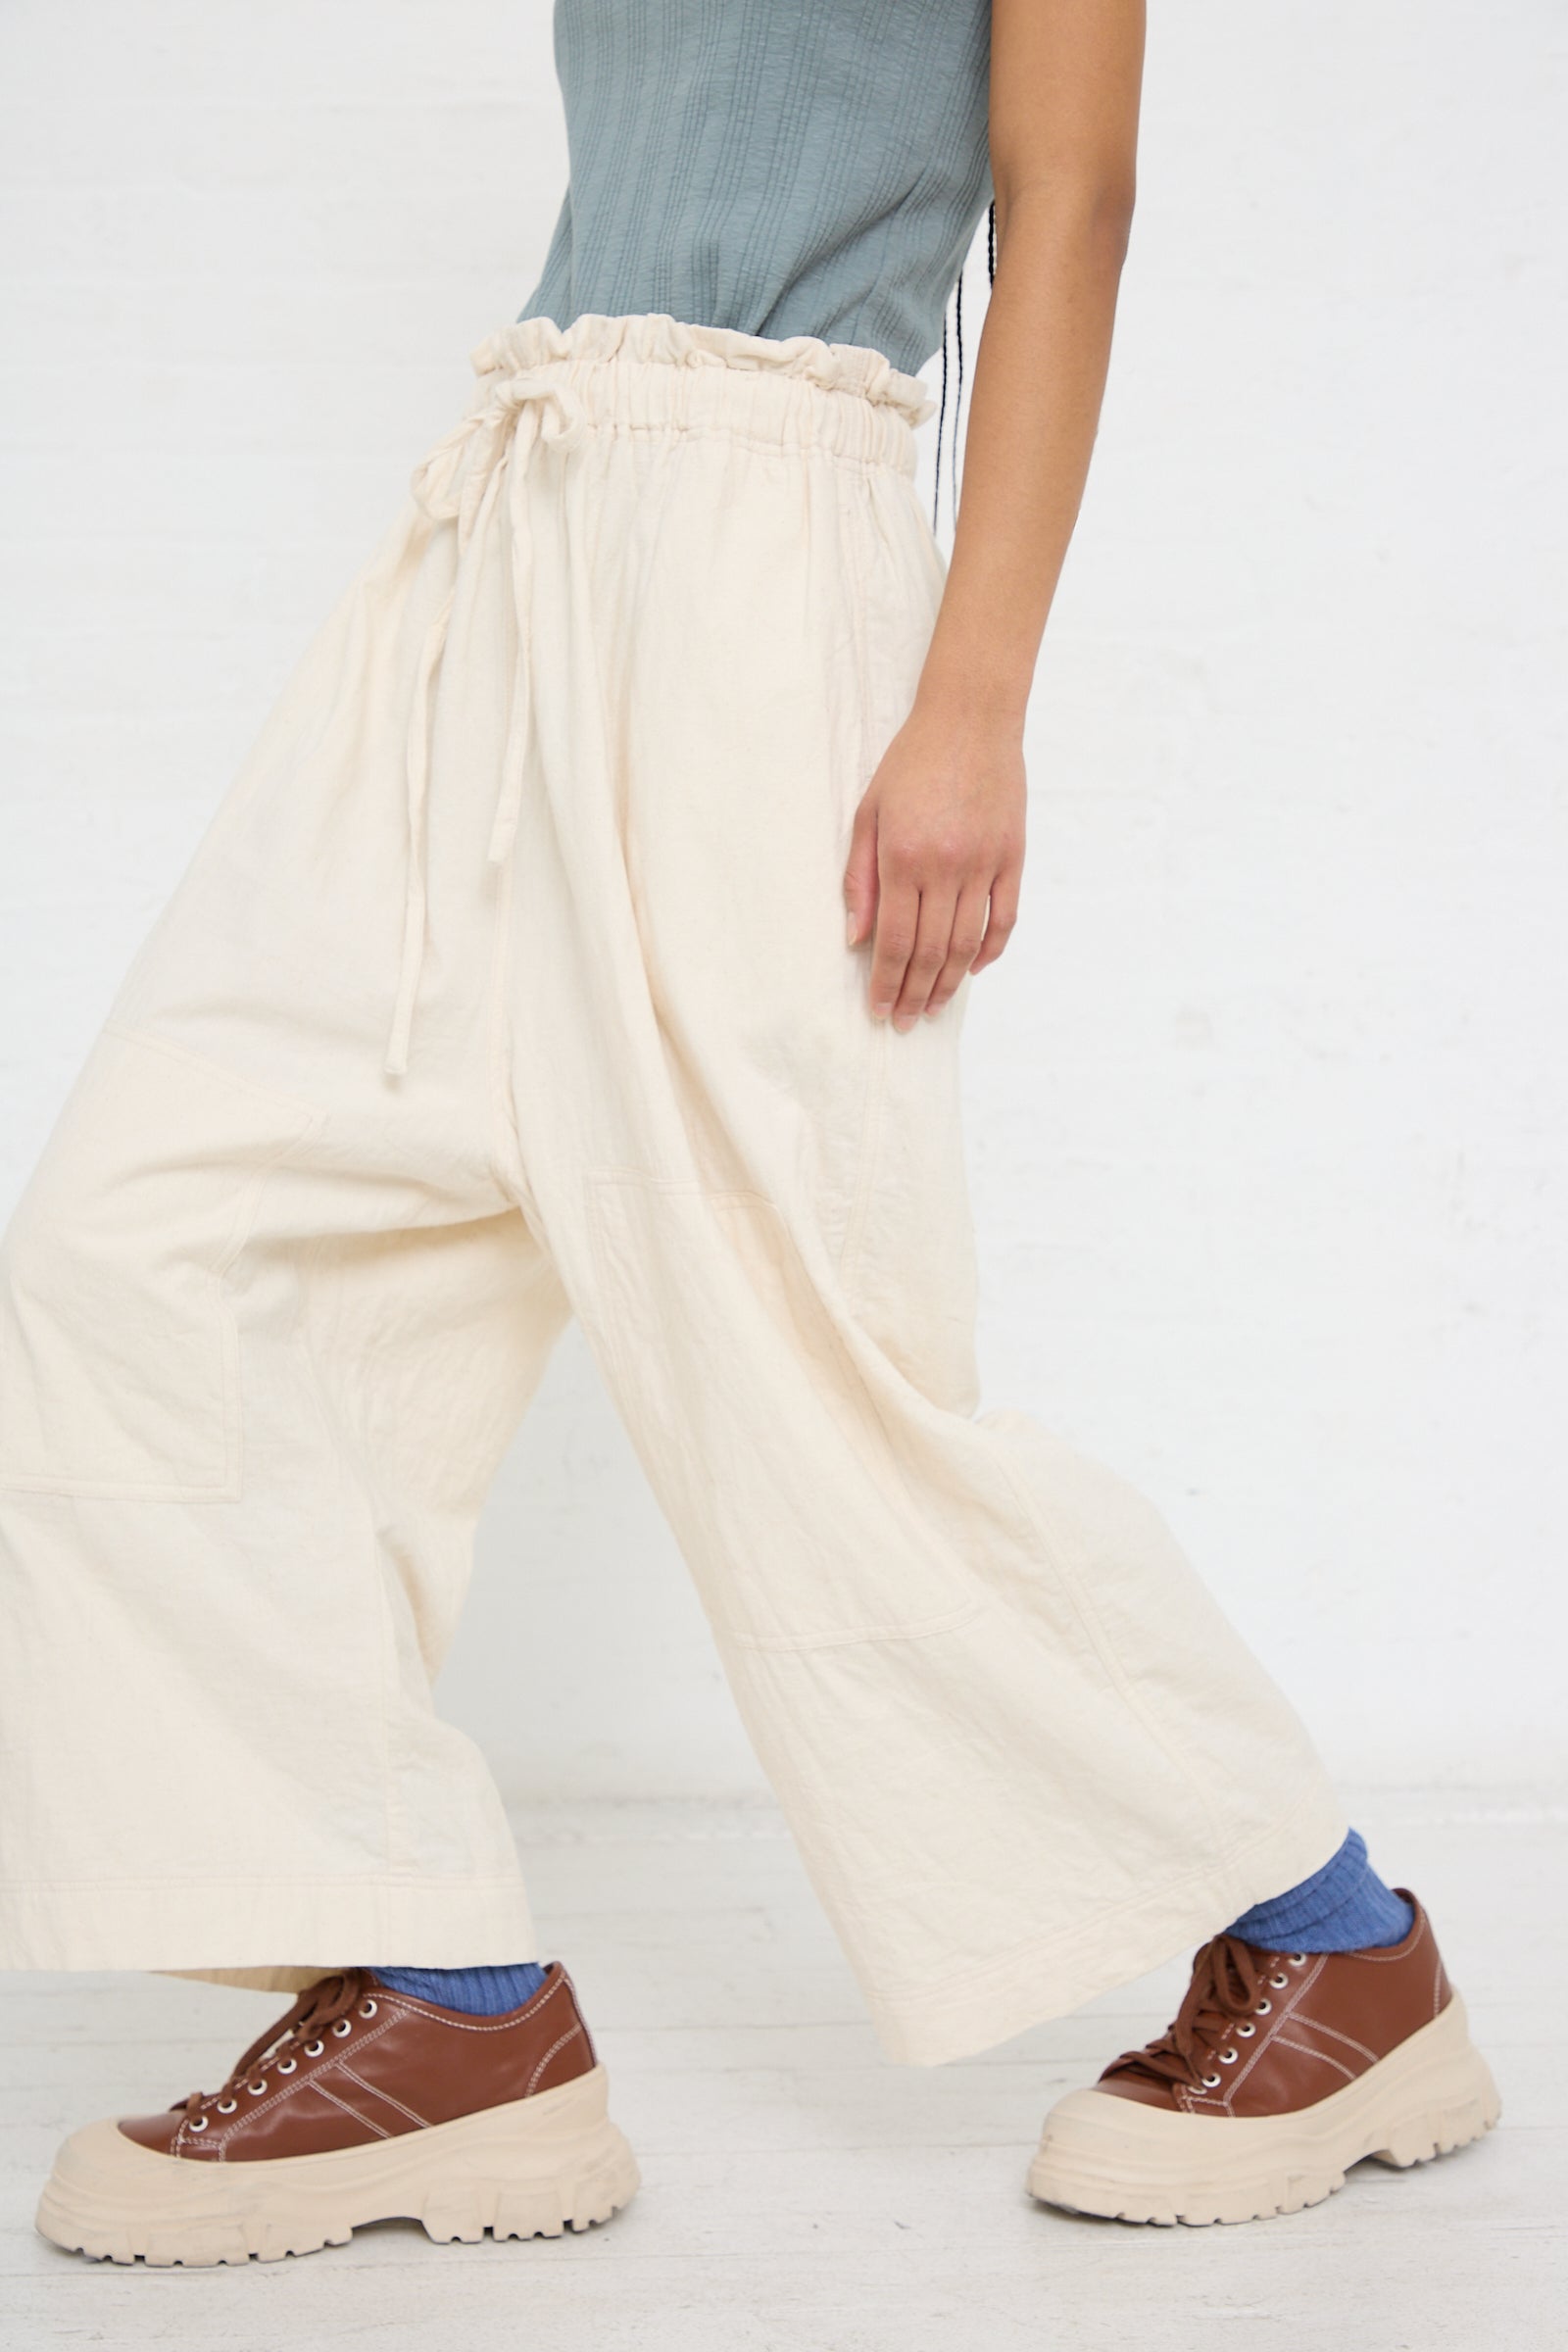 Person wearing Azumadaki Cotton Quilt Pant in Ivory oversized wide-leg pants by Ichi Antiquités and brown platform shoes.